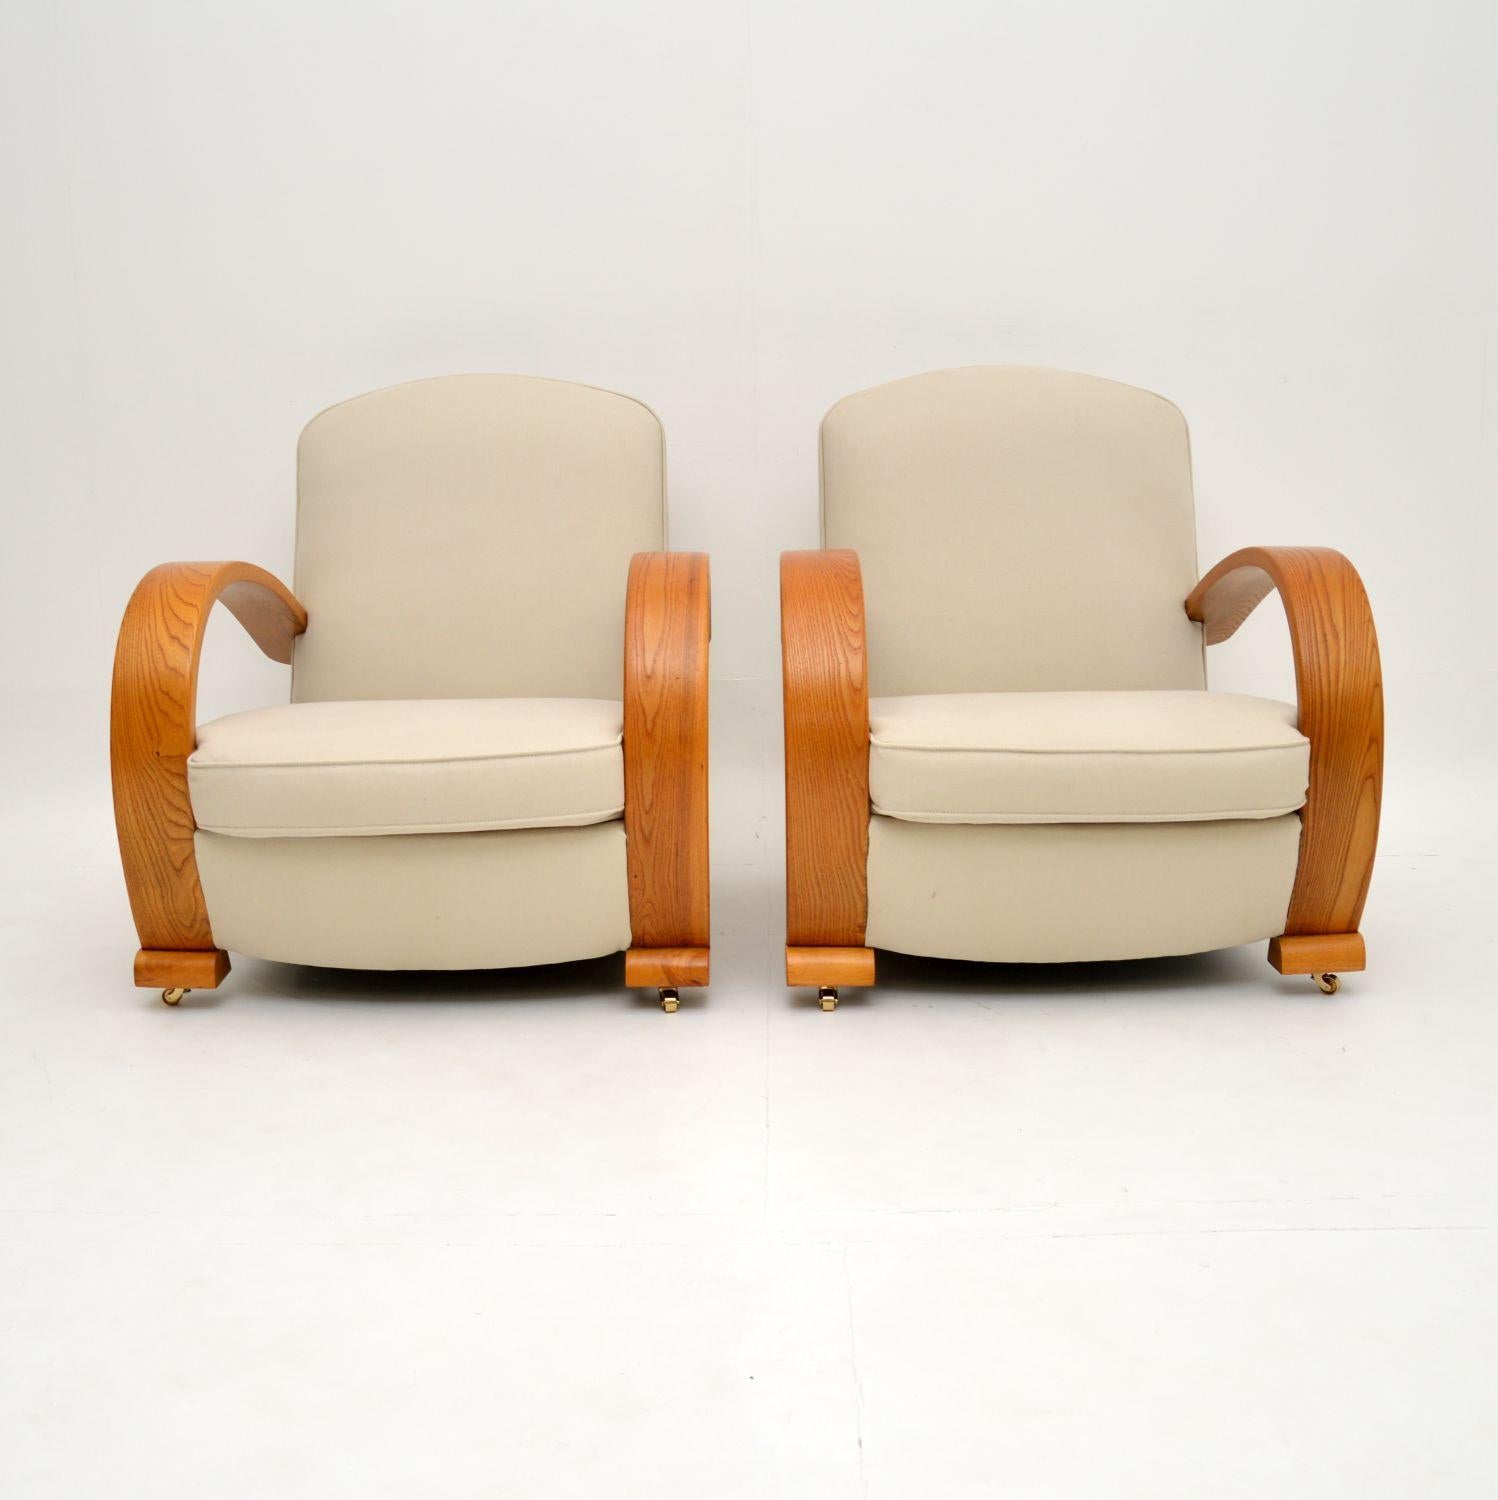 A stunning pair of Art Deco period armchairs, with gorgeous steam bent solid Elm frames. These were made in continental Europe, most likely Sweden, and they date from the 1920-1930’s.

The quality is amazing, they have a striking design and are